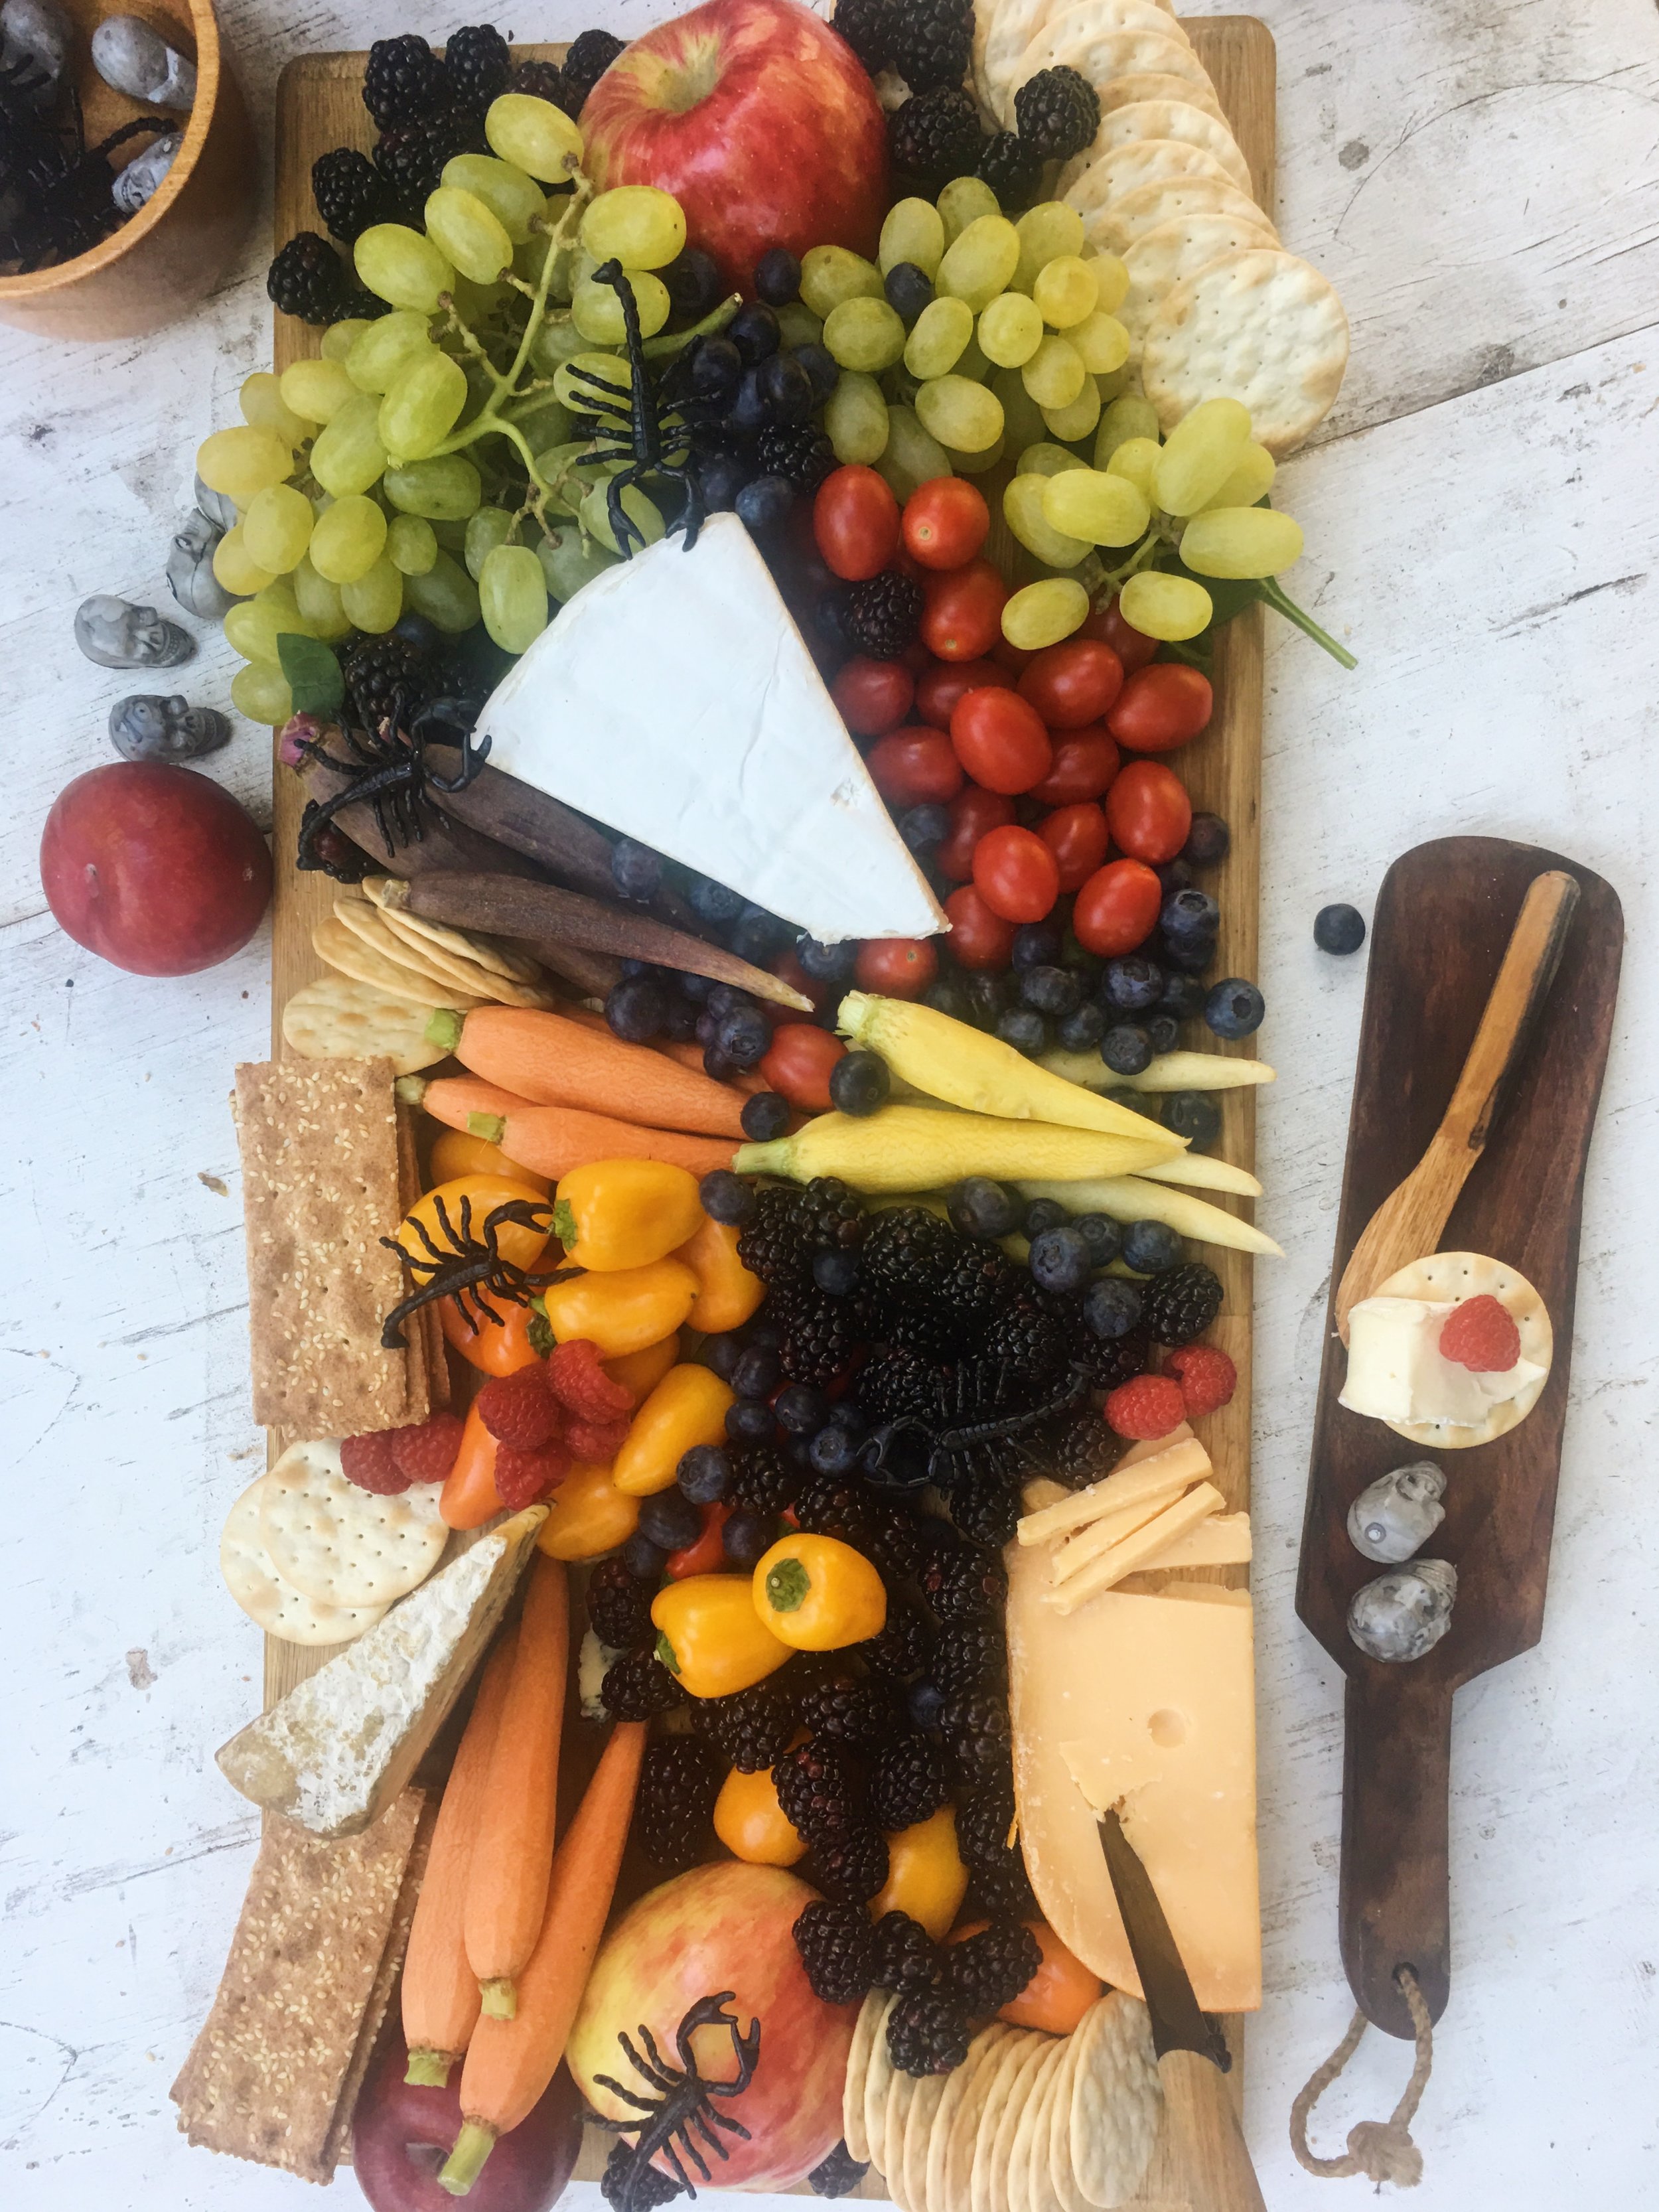 A classic cheese board full of delights. Be generous. Even a scorpion or two makes for a little variety (just kidding ... boo!)